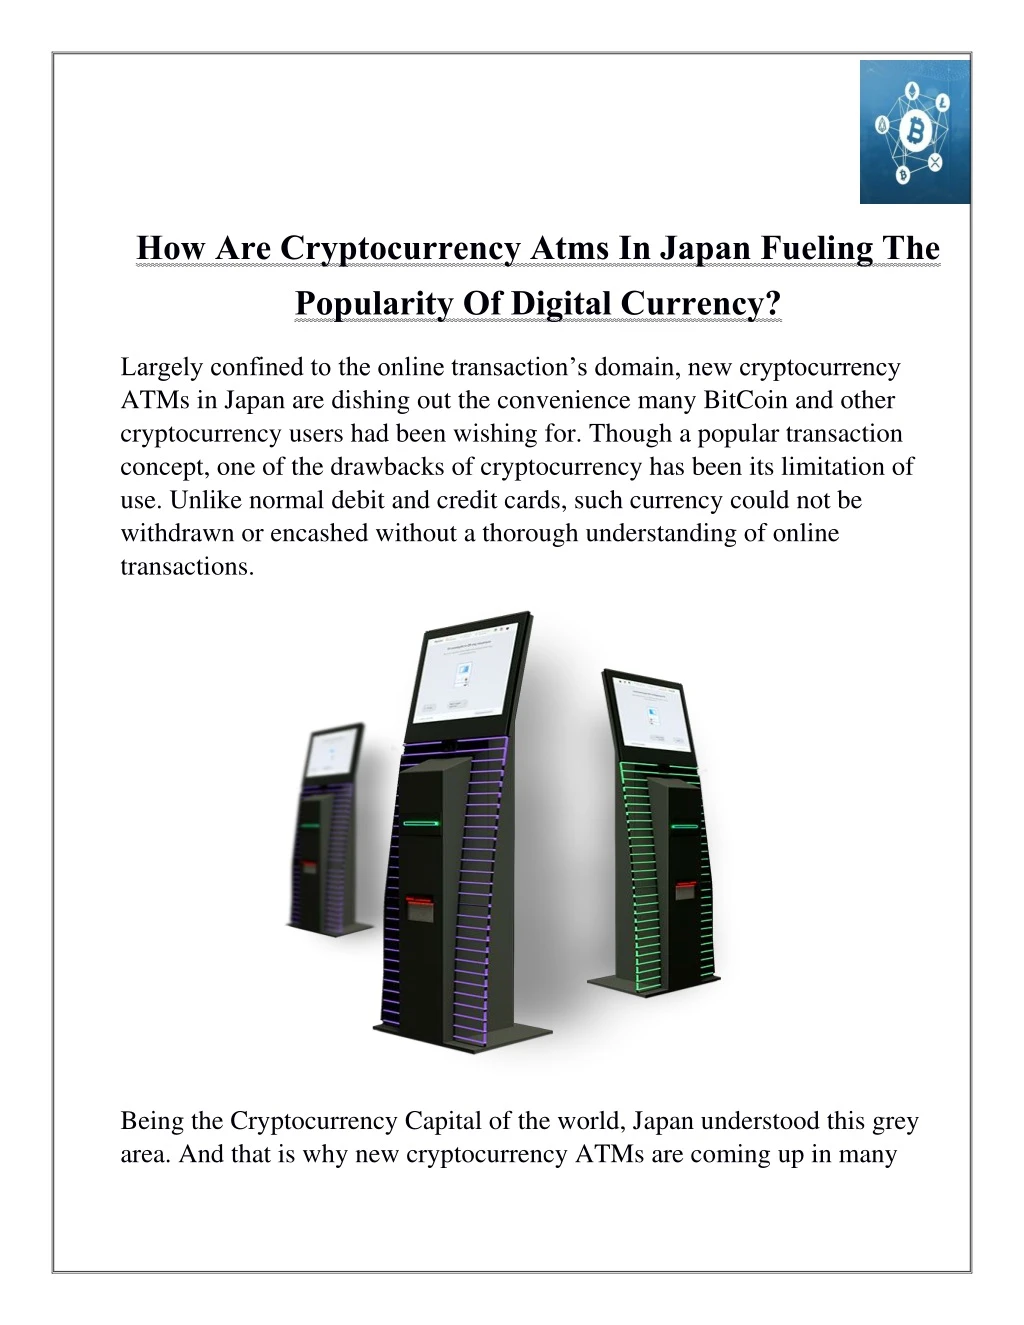 how are cryptocurrency atms in japan fueling